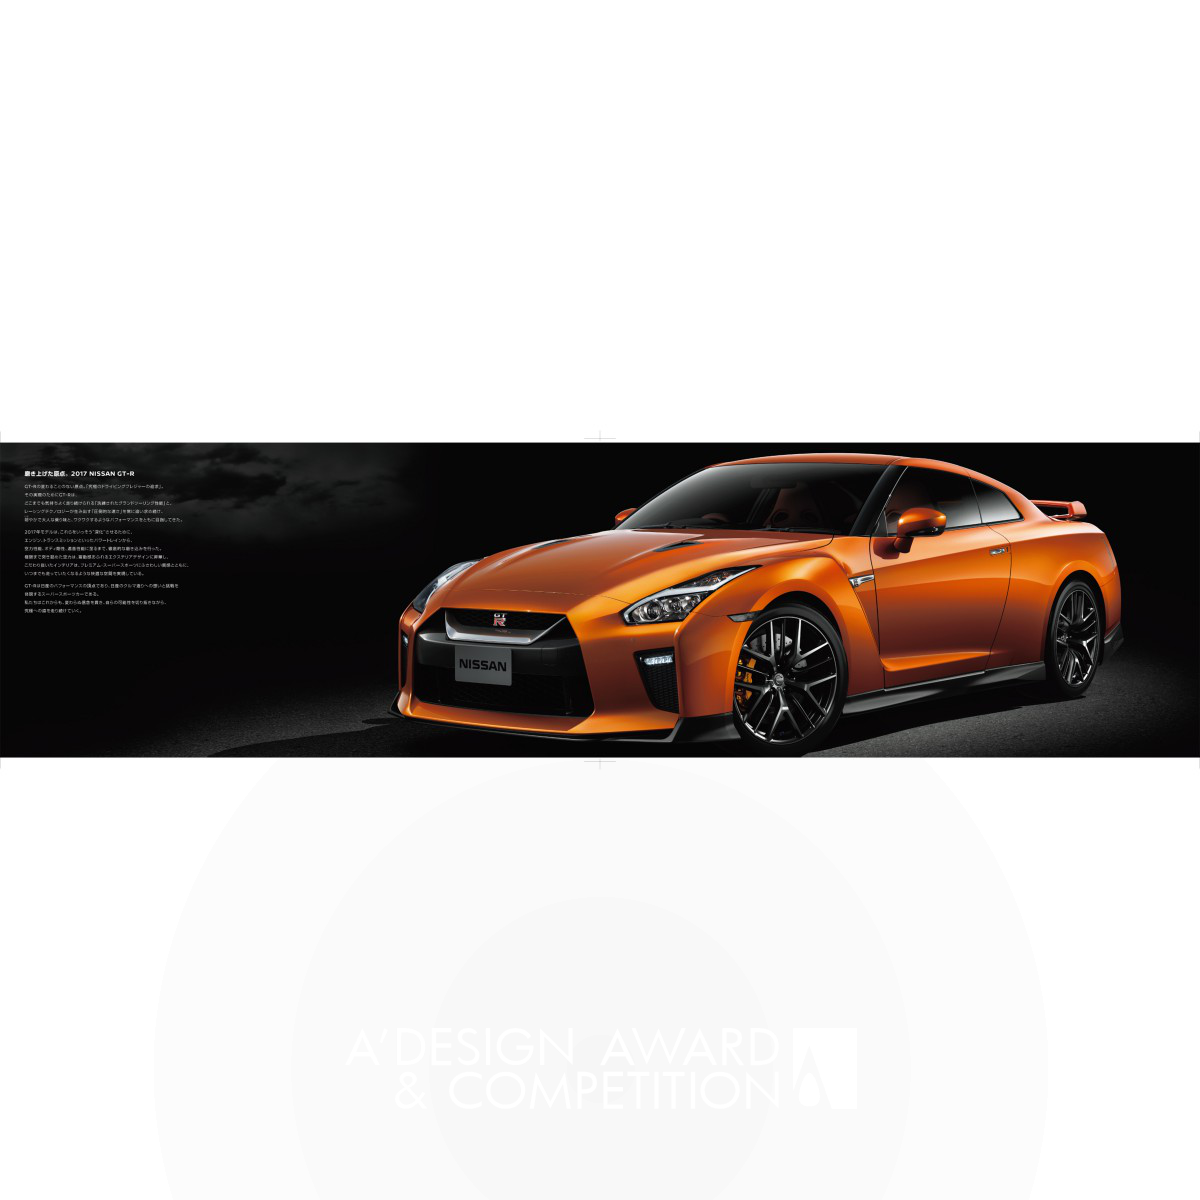 Nissan GT-R Brochure by E-graphics communications